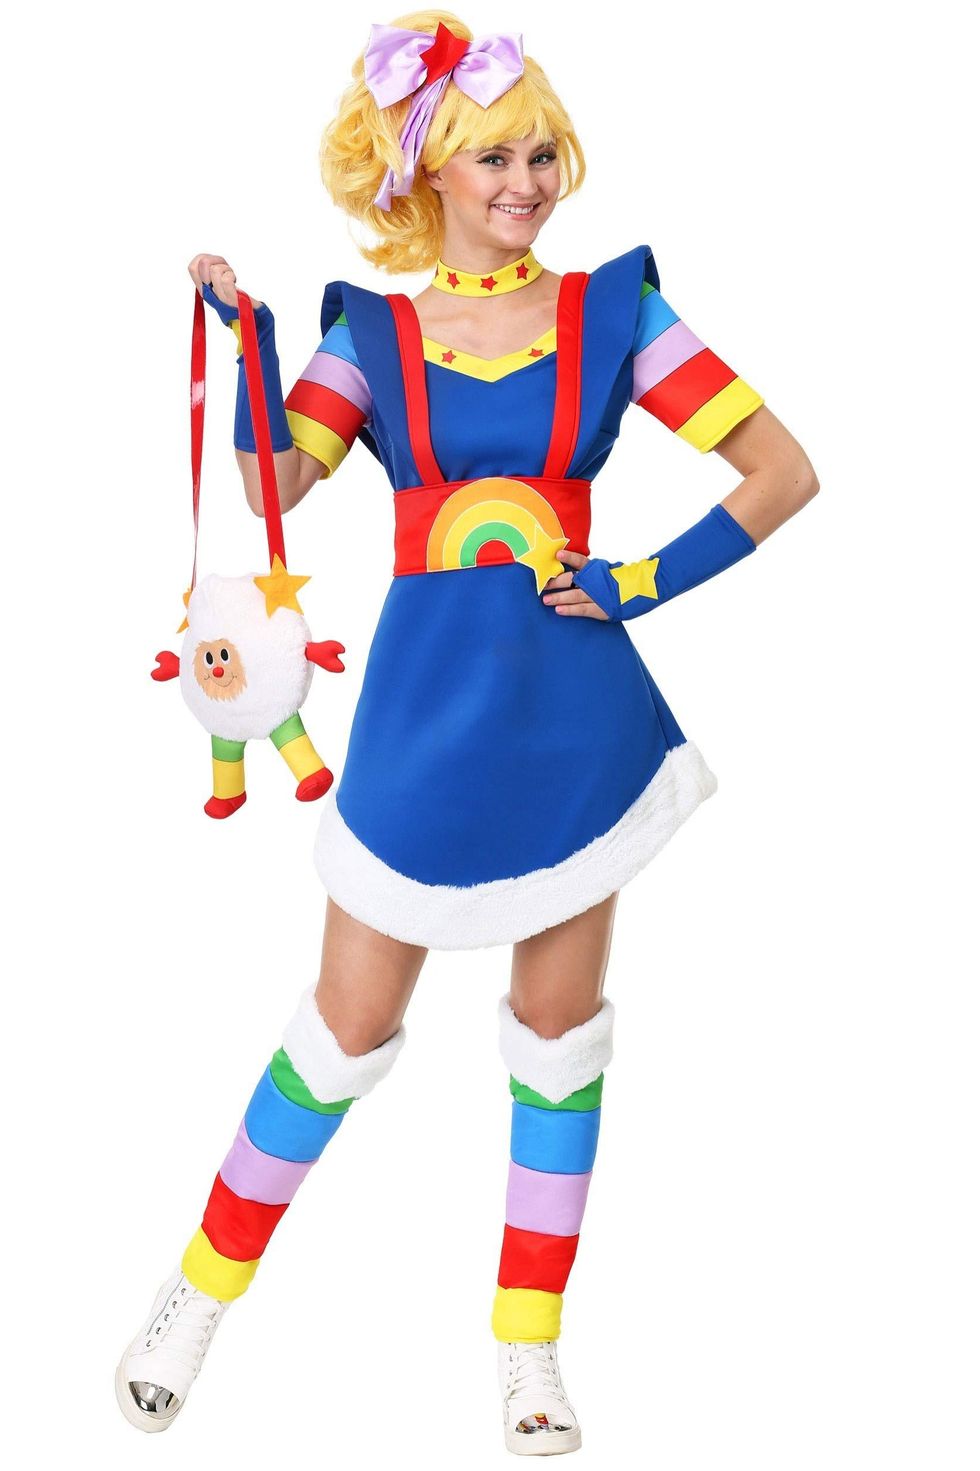 Colorful Costume Ideas for a Spectrum of Fun [Costume Guide